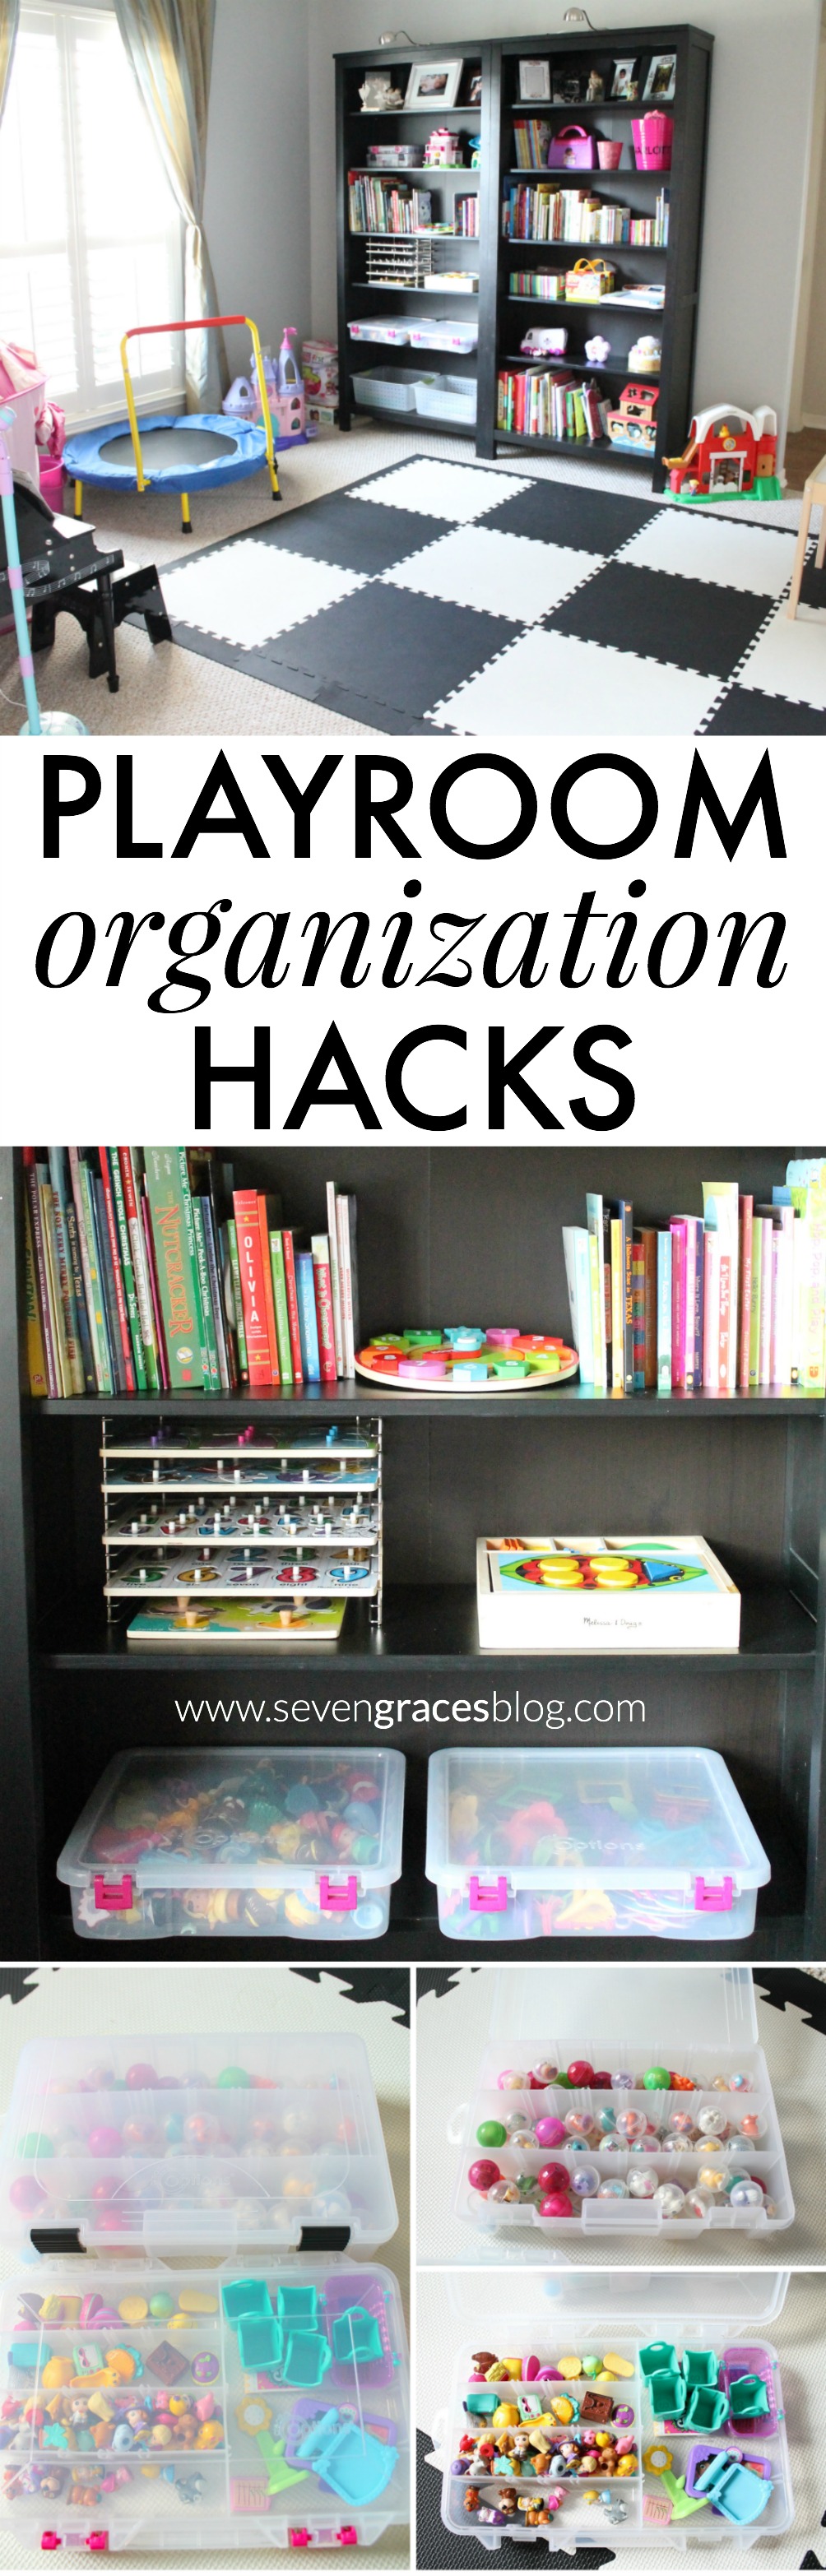 Playroom Organization Hacks. 7 organization hacks to get your playroom in tip-top shape! From Creative Options boxes to shoe boxes, your playroom will be a dream!   #storagewithstyle #Pmedia #ad